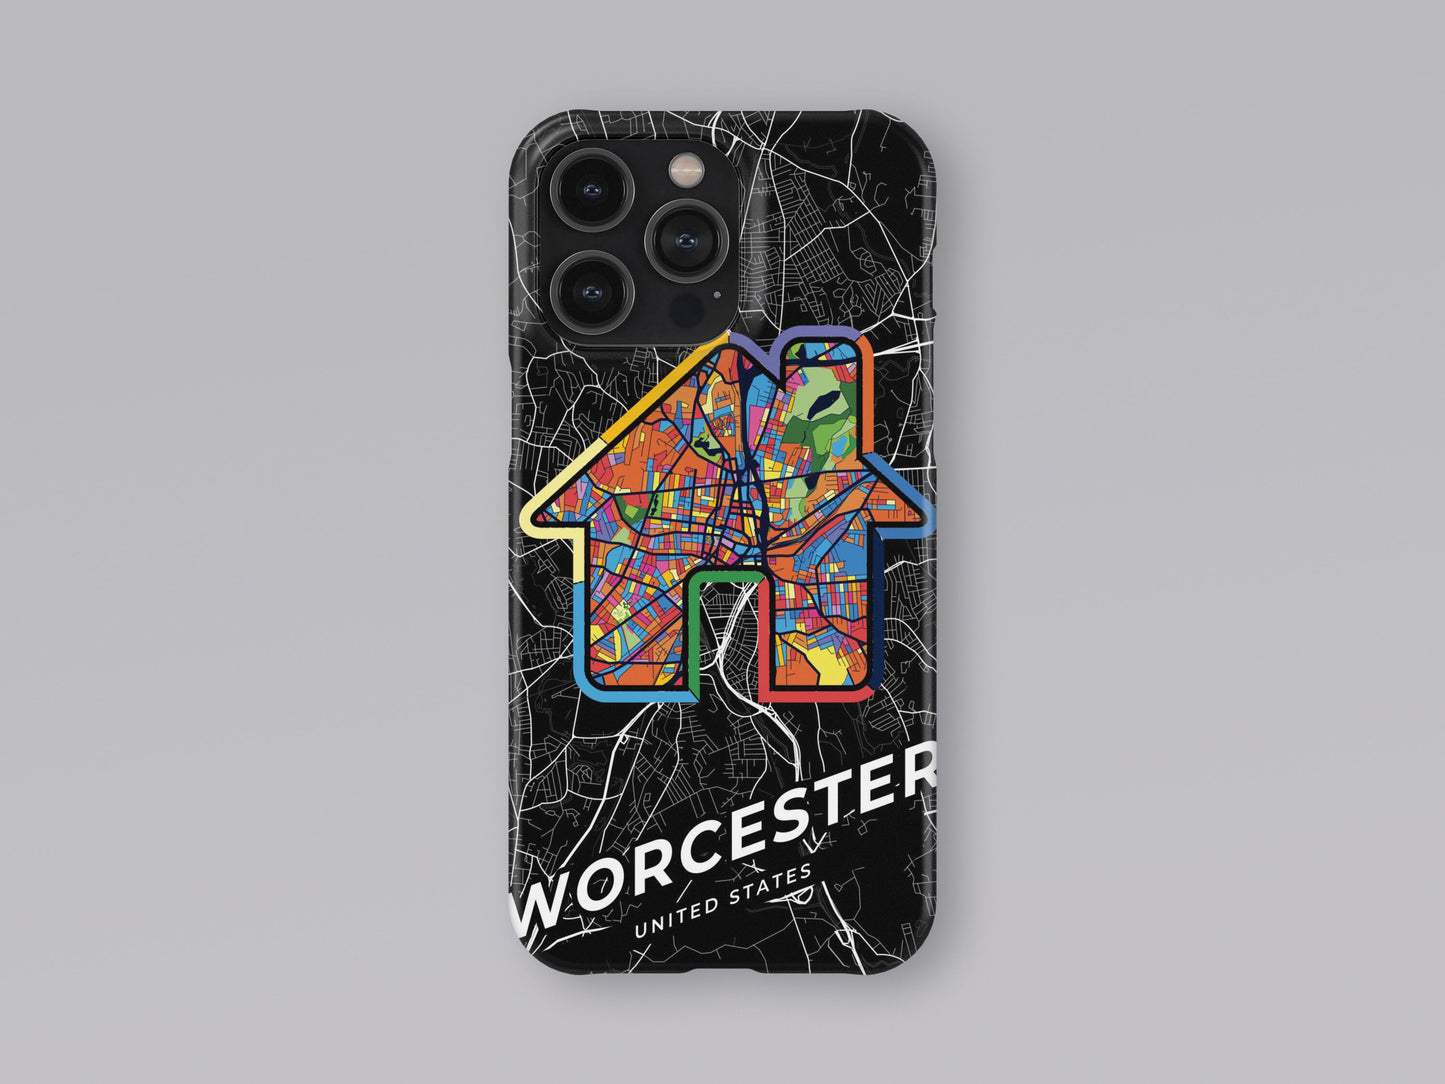 Worcester Massachusetts slim phone case with colorful icon 3